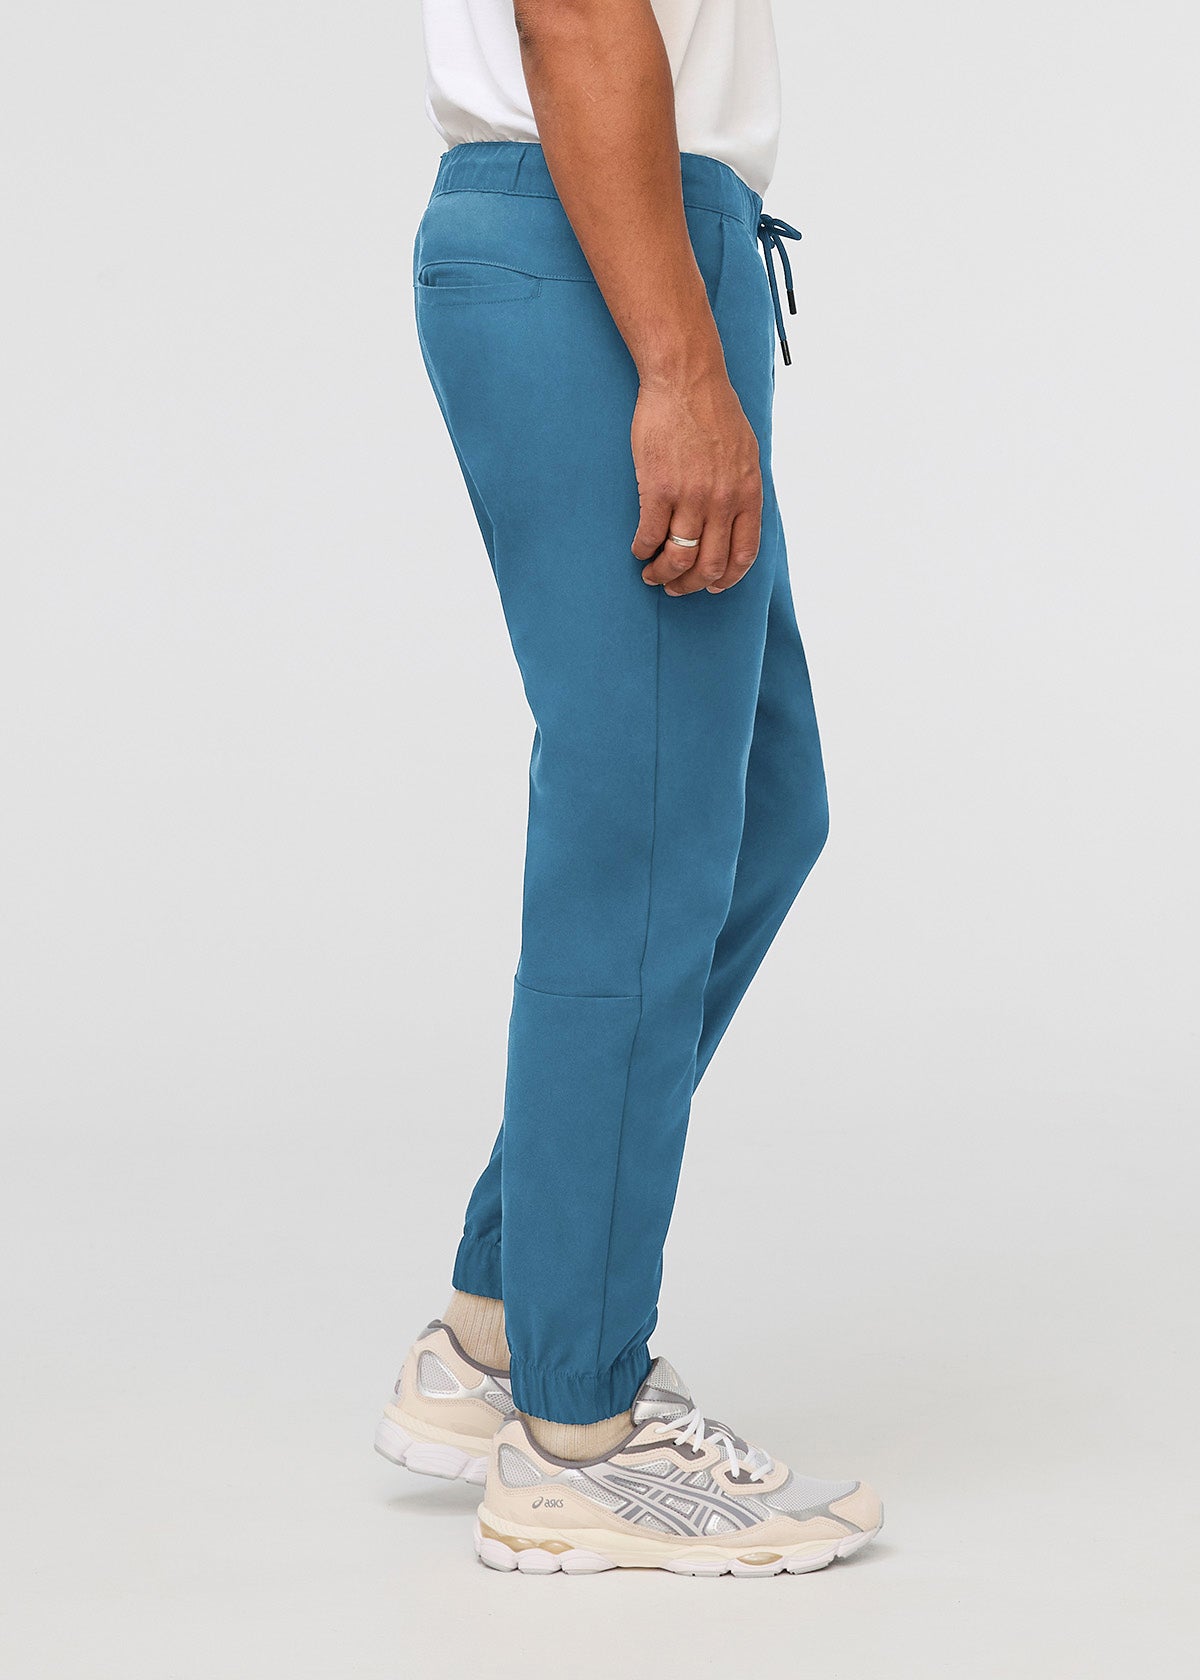 mens blue athleisure jogger side